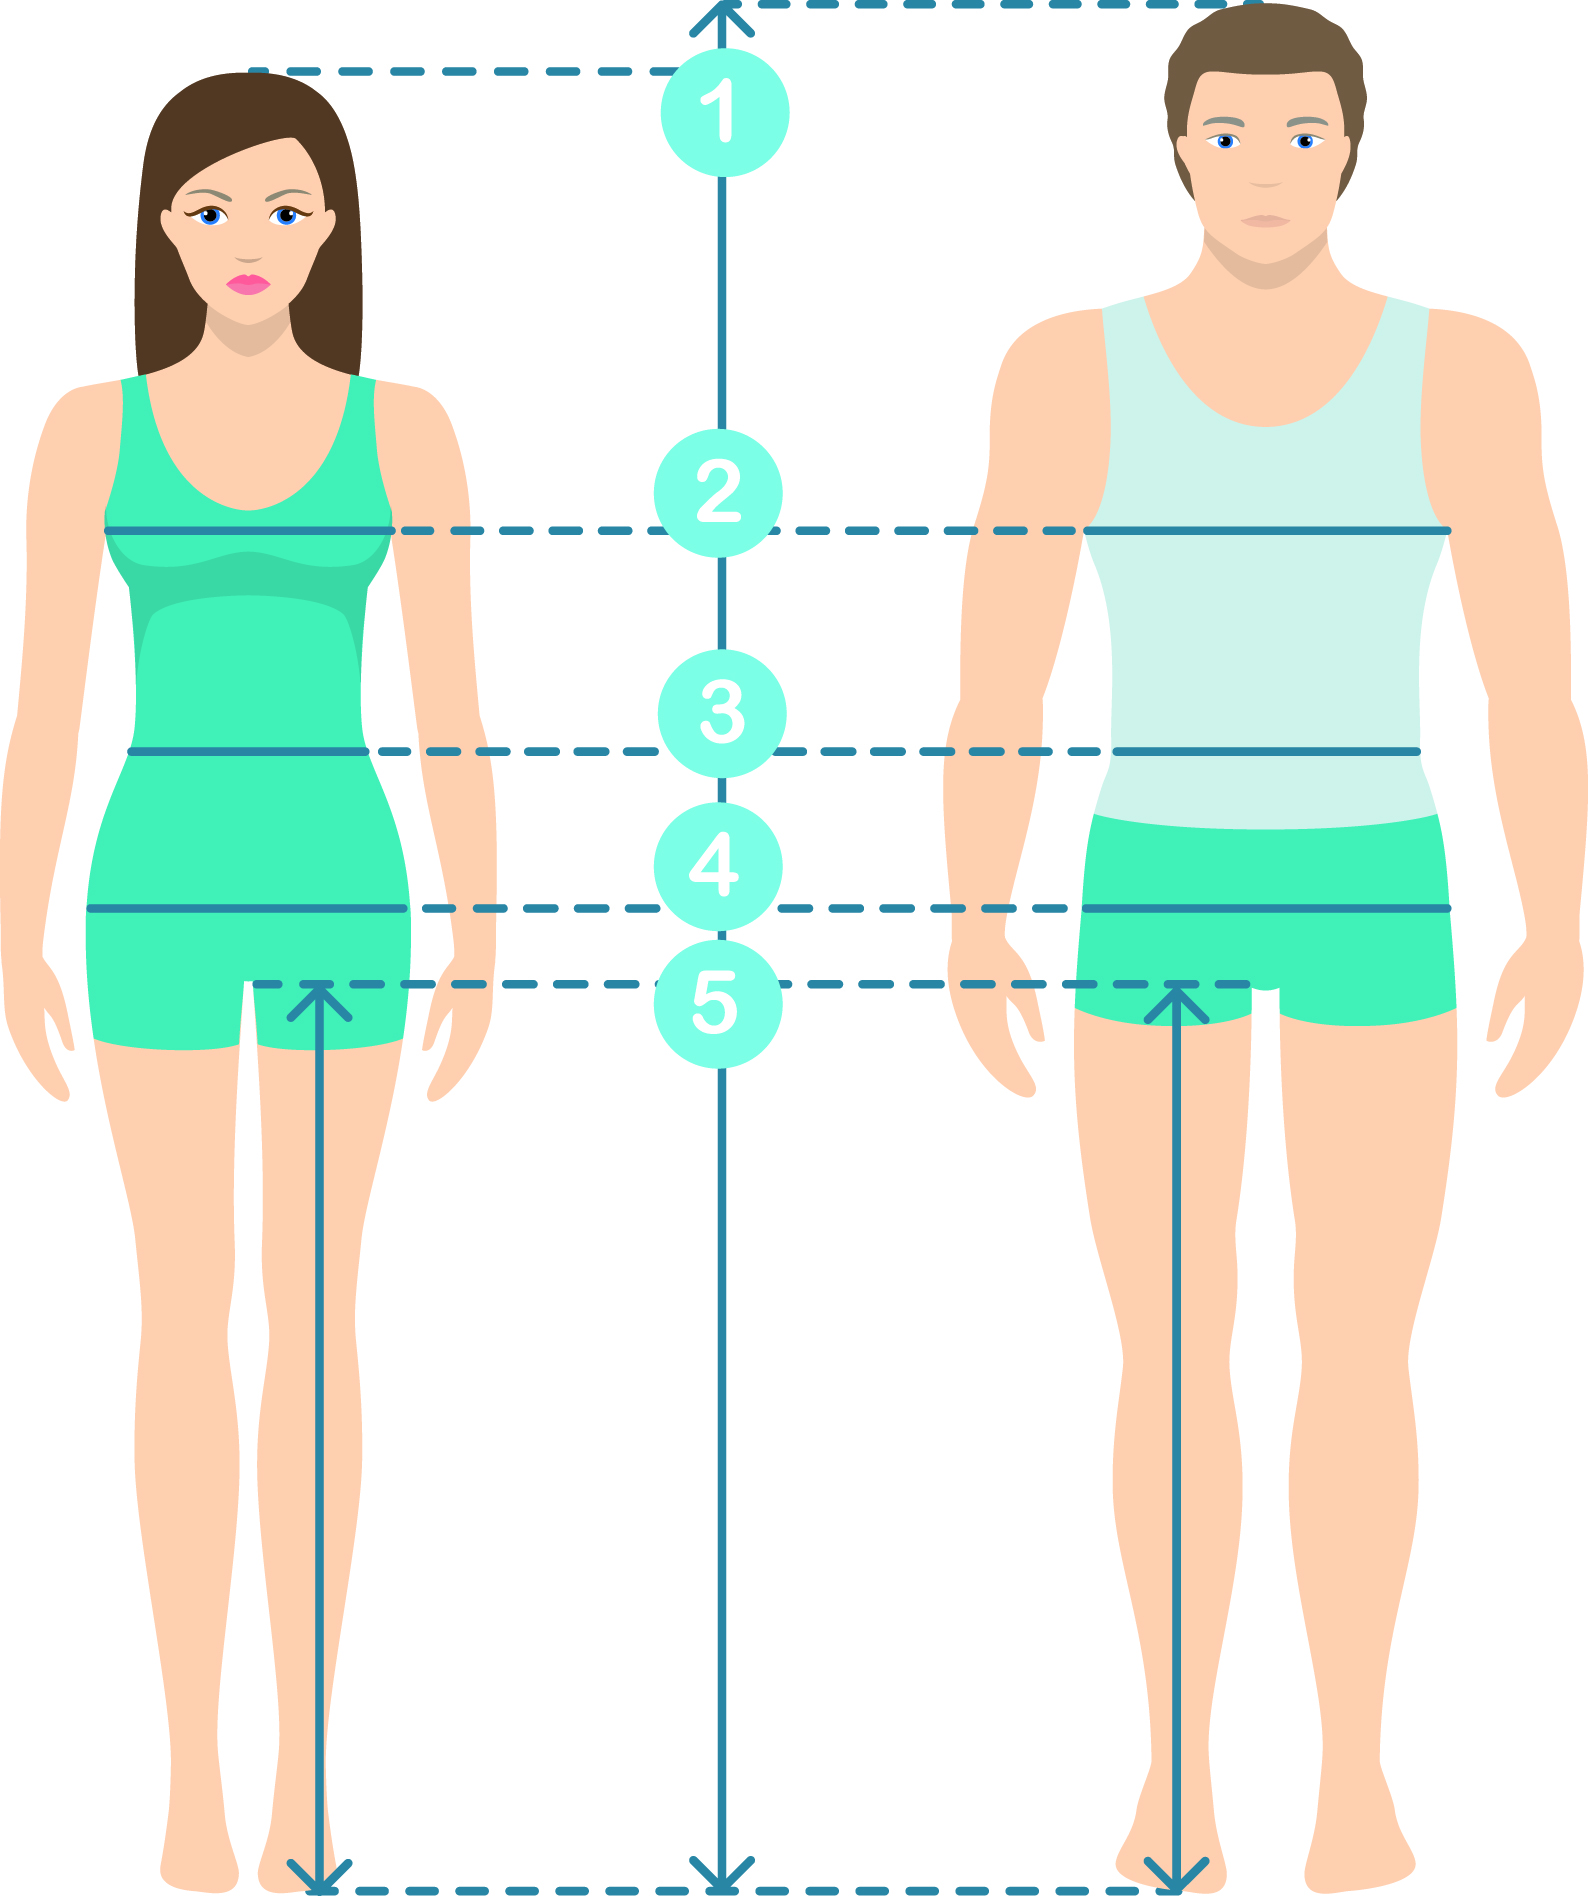 Bust Waist Hips Measurement Position in the Body